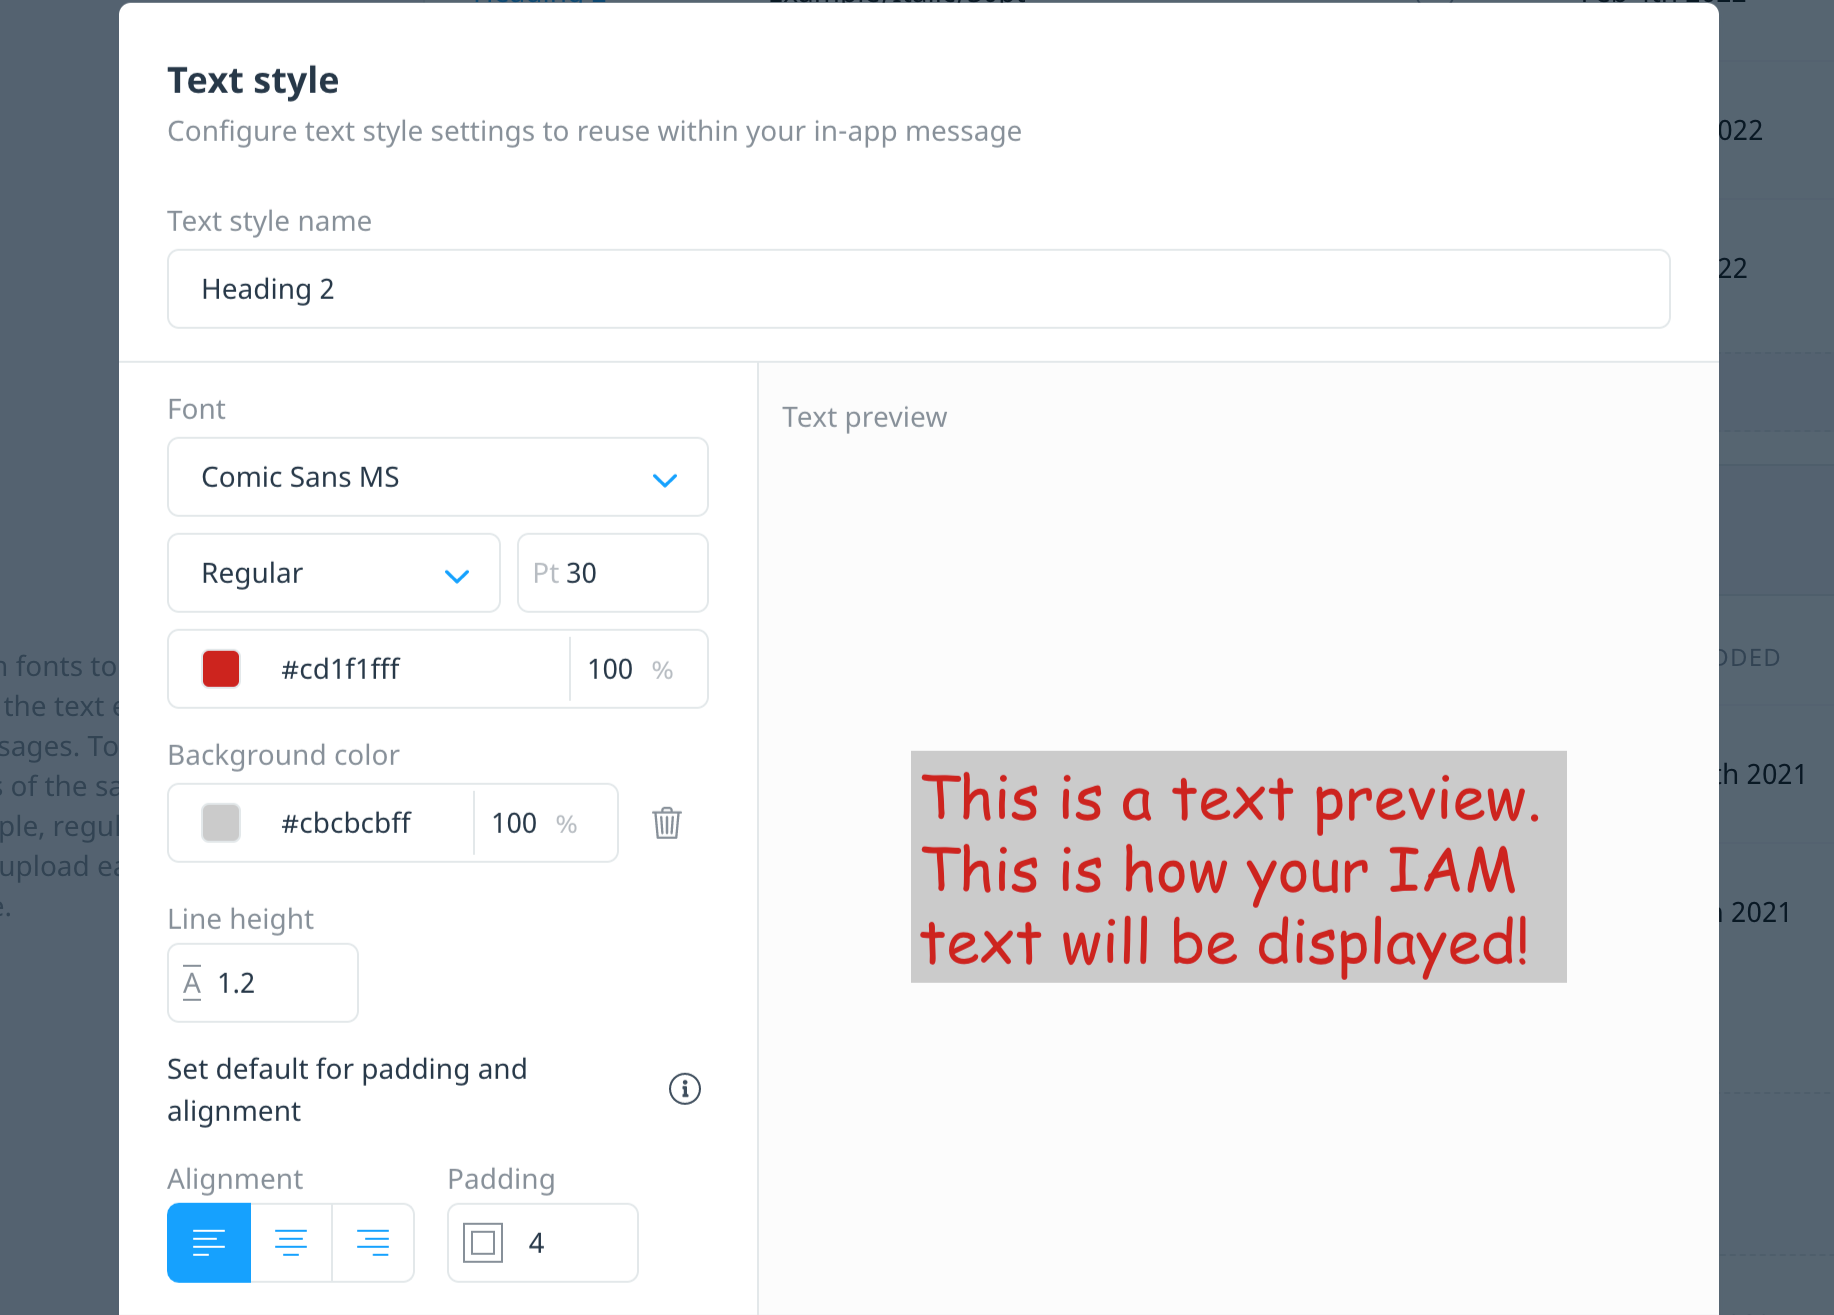 Configure text style settings to reuse within your in-app message